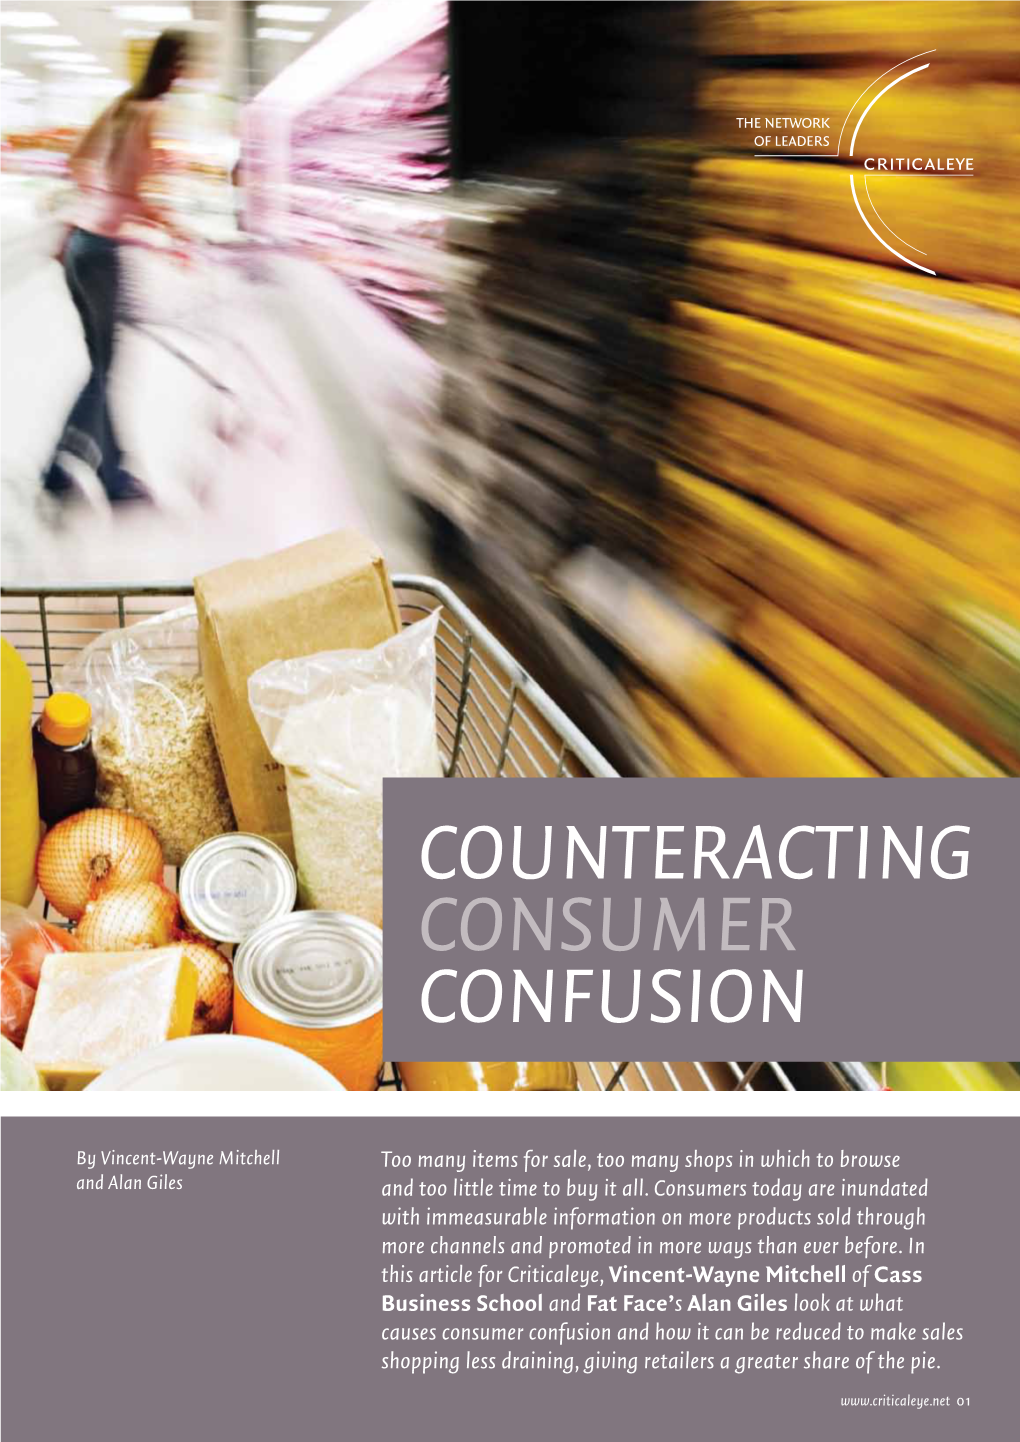 Counteracting Consumer Confusion